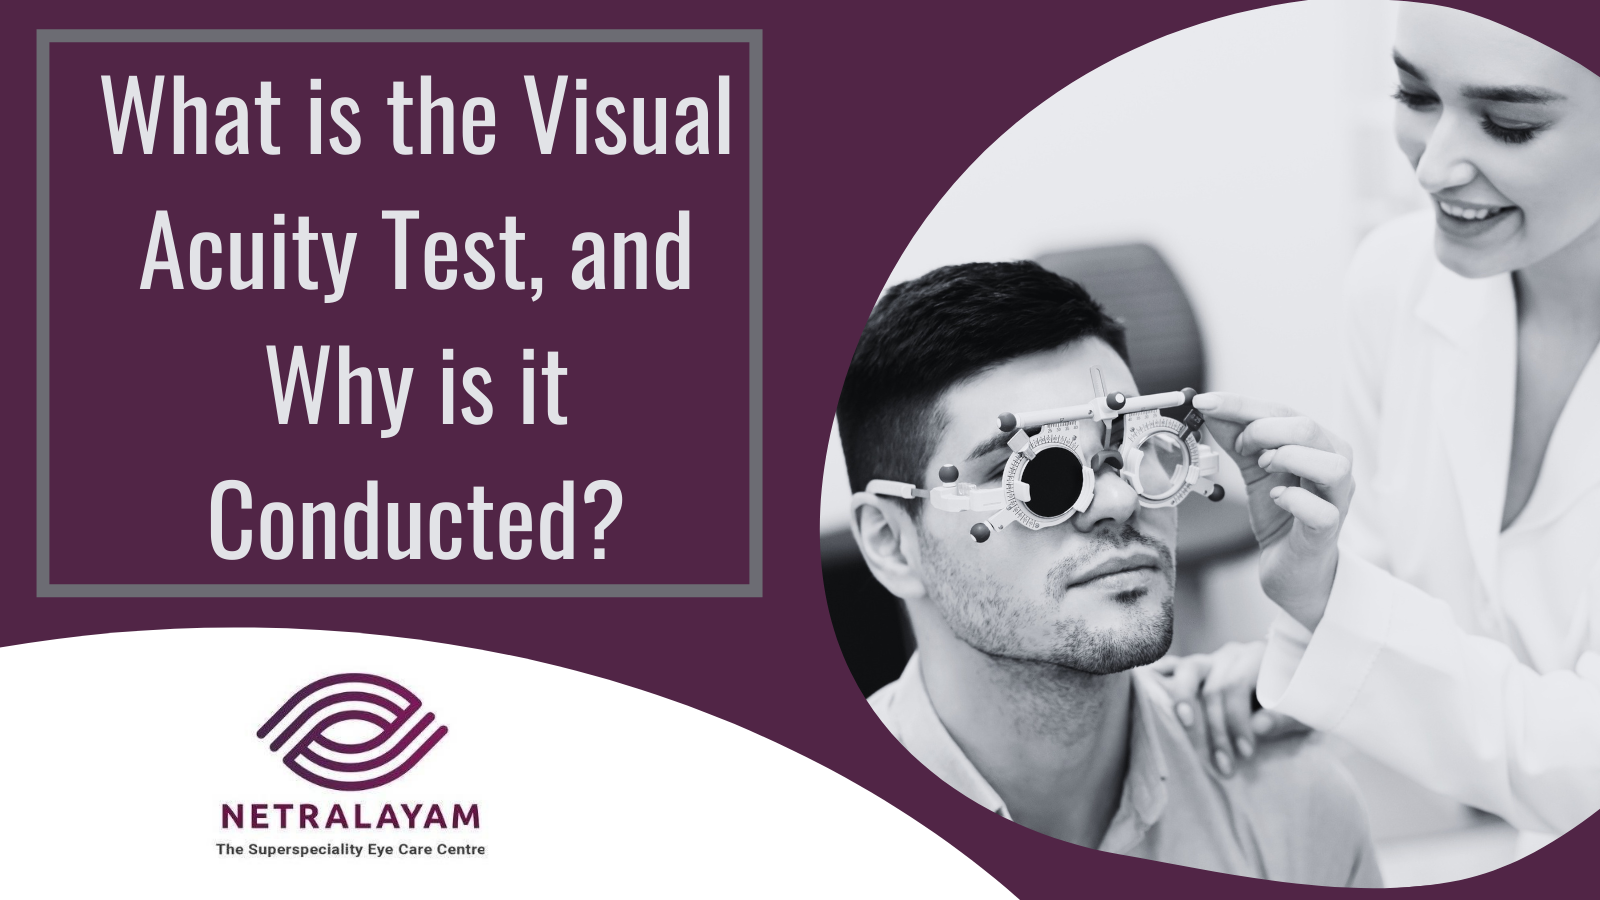 What is the Visual Acuity Test, and Why is it Conducted?